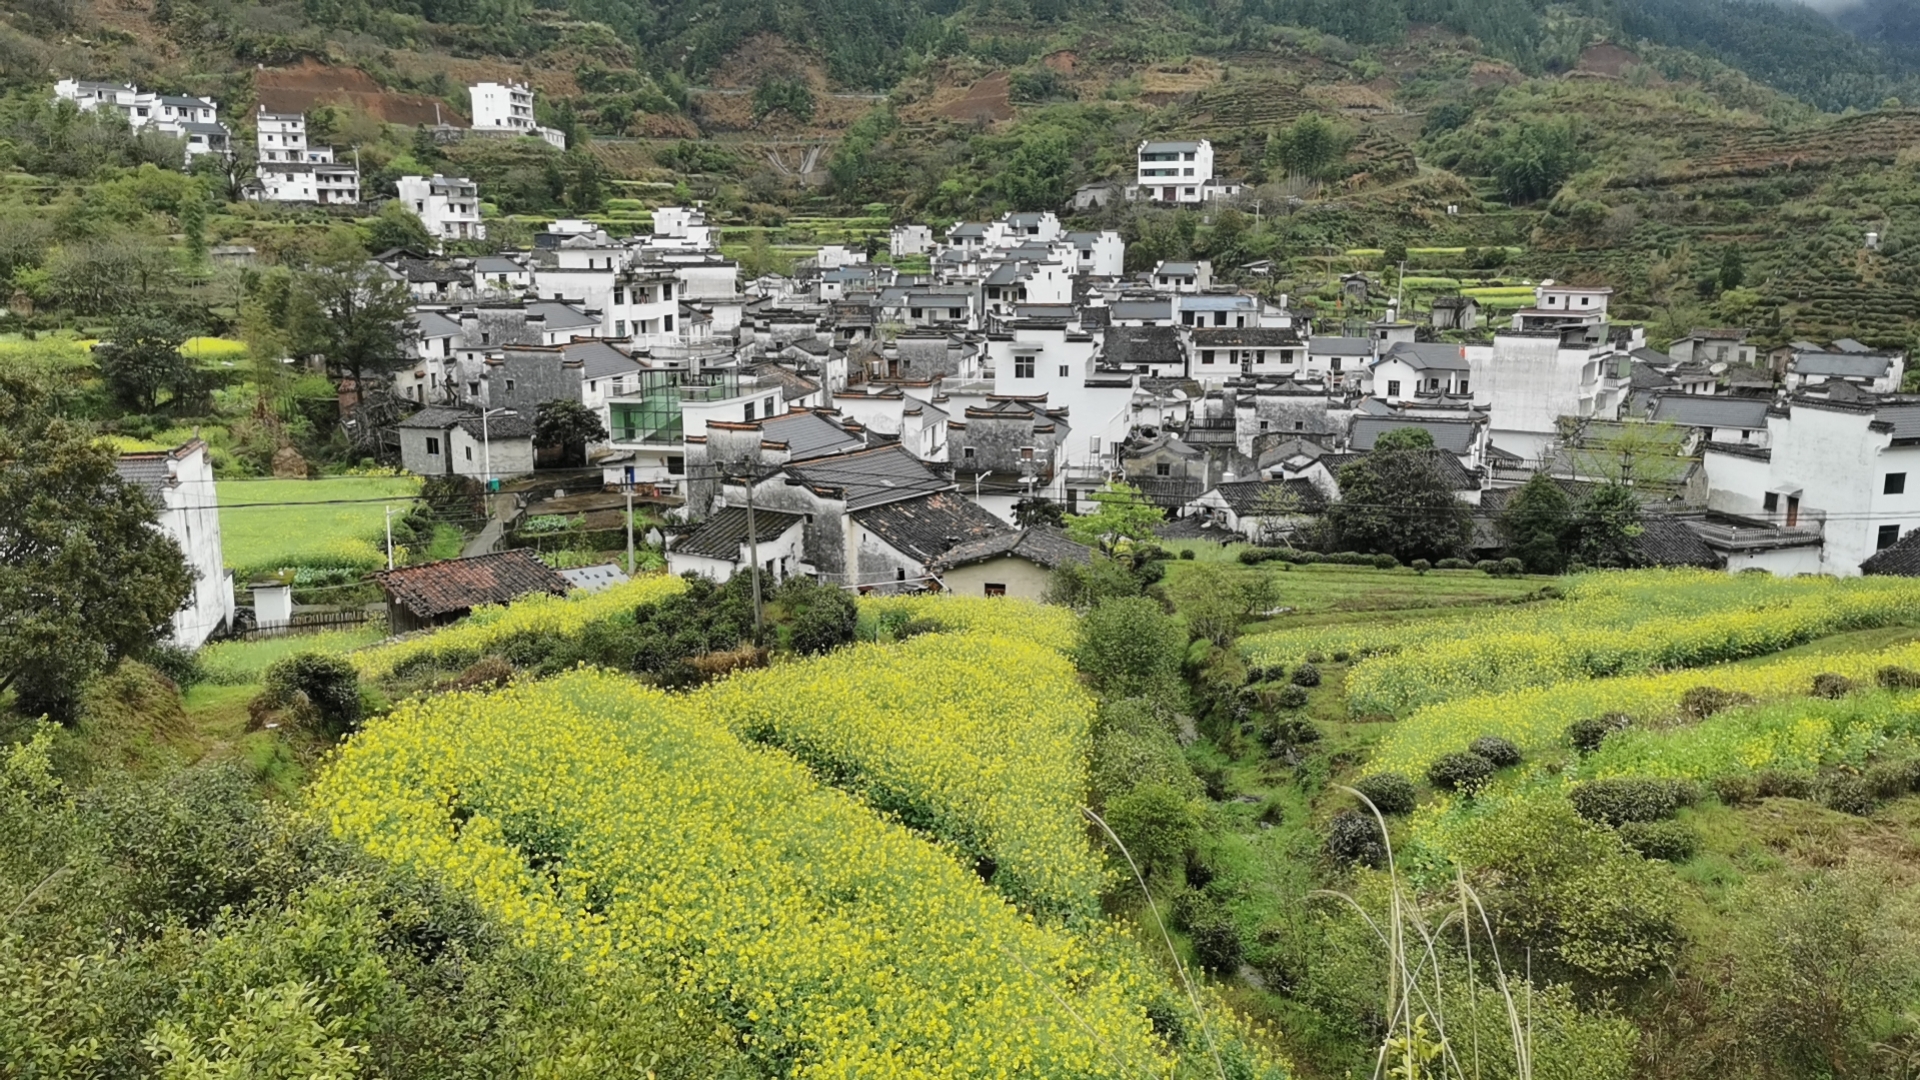 Rapeseed flowers in Shangrao City in east China's Jiangxi Province are in full bloom! The idyllic scenery is in perfect contrast with Huizhou-style residential houses, attracting tourists and photographers all over the country each year. April 4, 2023. /CGTN